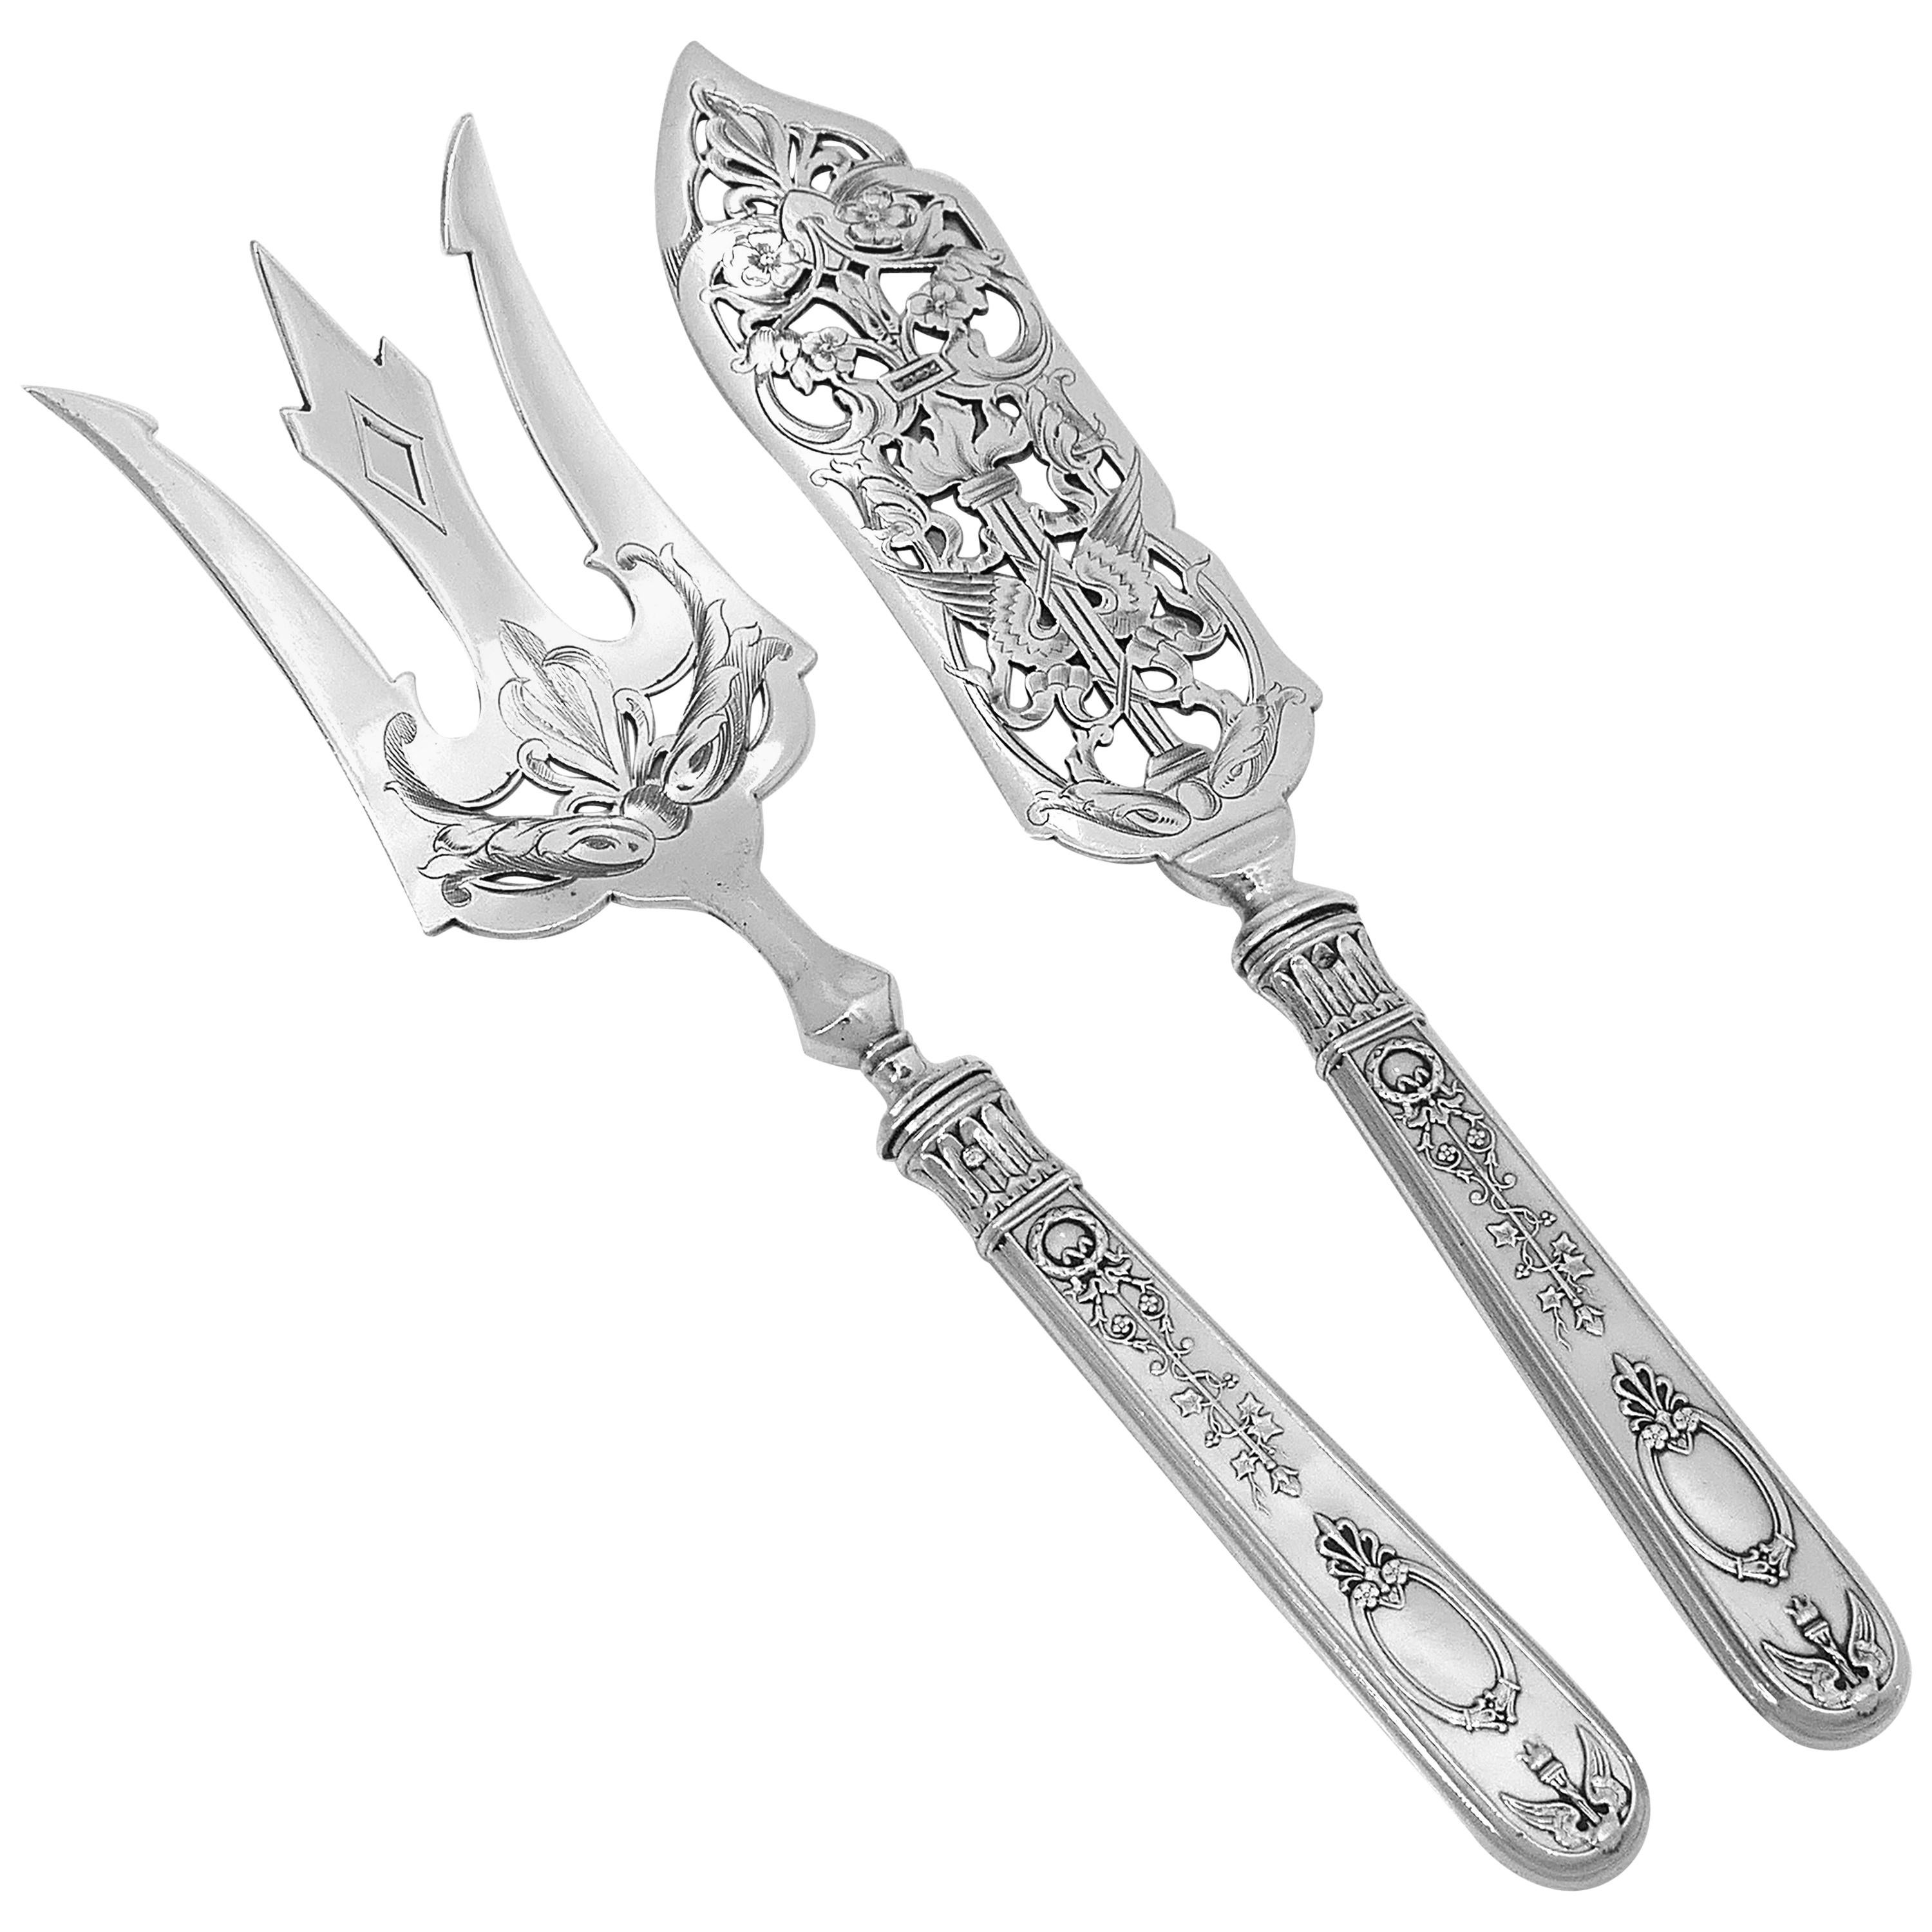 Lapparra Fabulous French Sterling Silver Fish Server 2 Pc, Baron Gerard, Empire For Sale